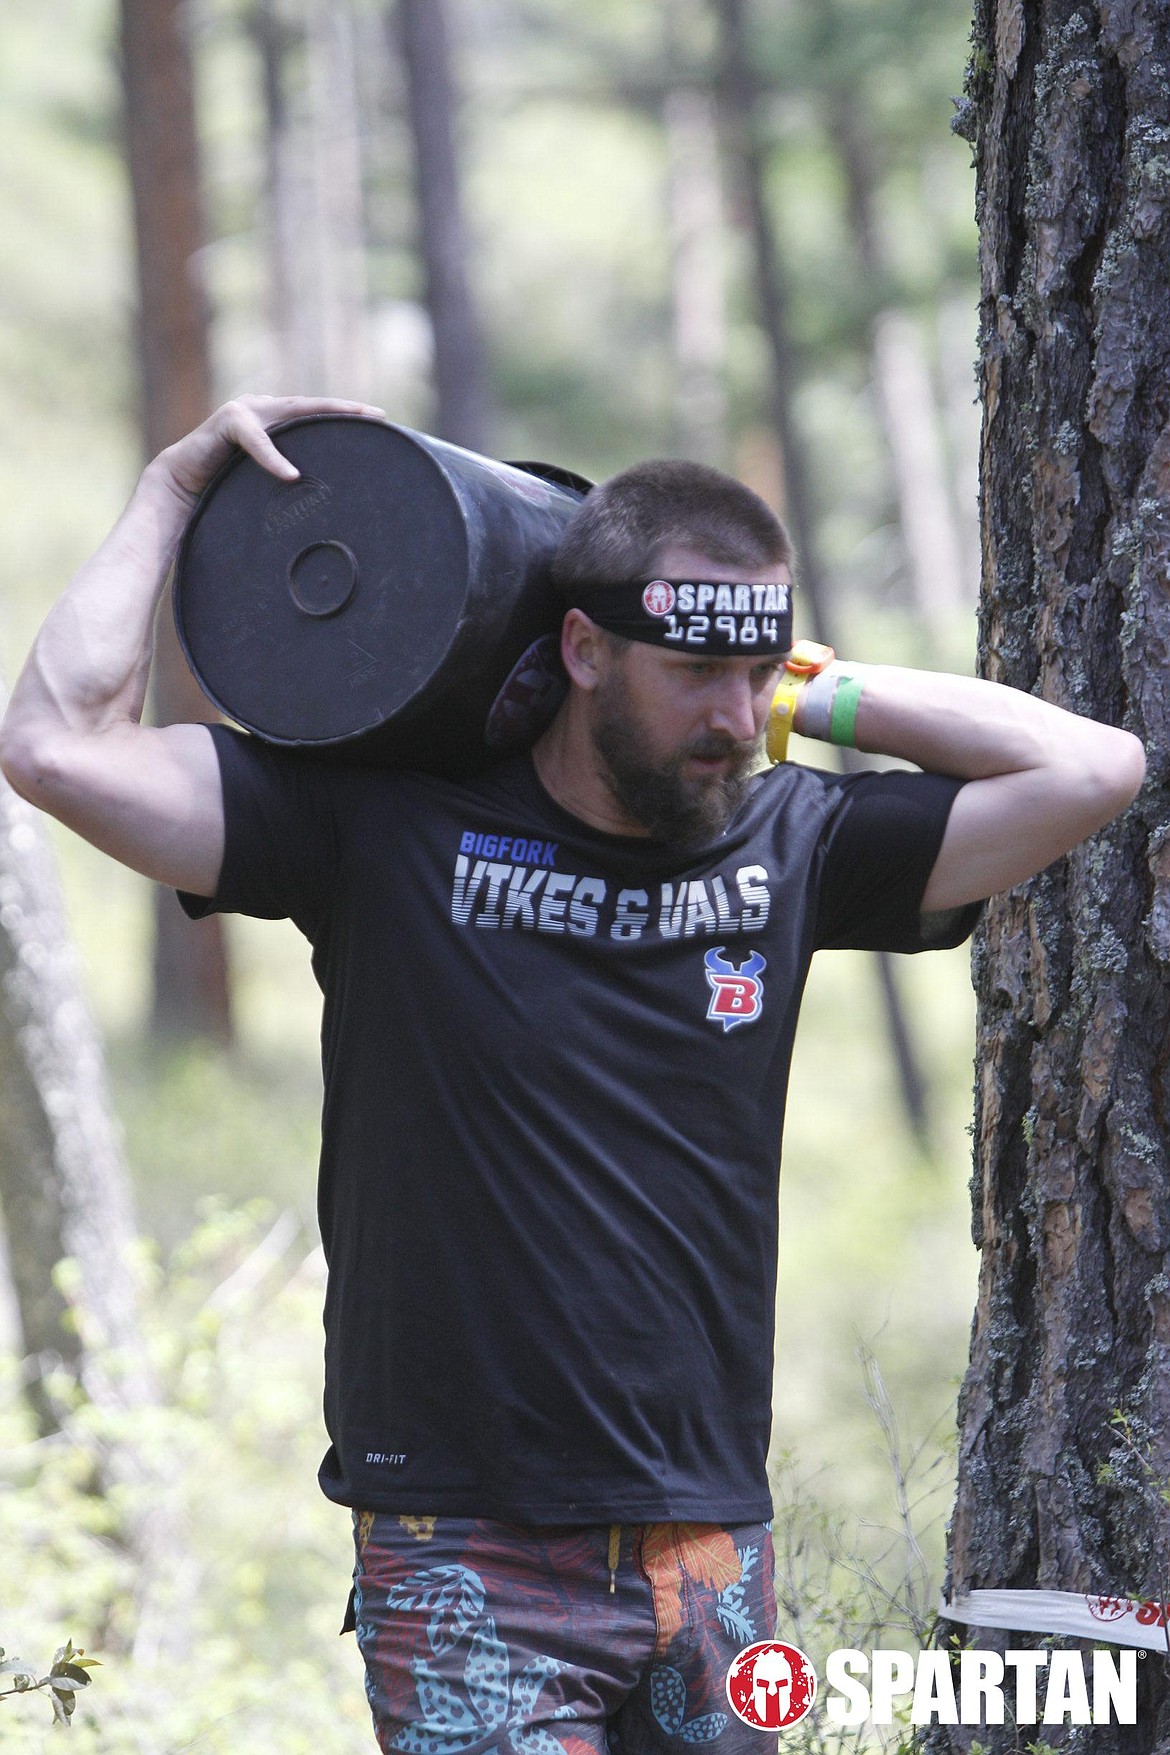 Ryan Nollan competes in a Spartan Race. The new head cross country coach has been participating in Spartan Races for the past seven years.
Courtesy photo